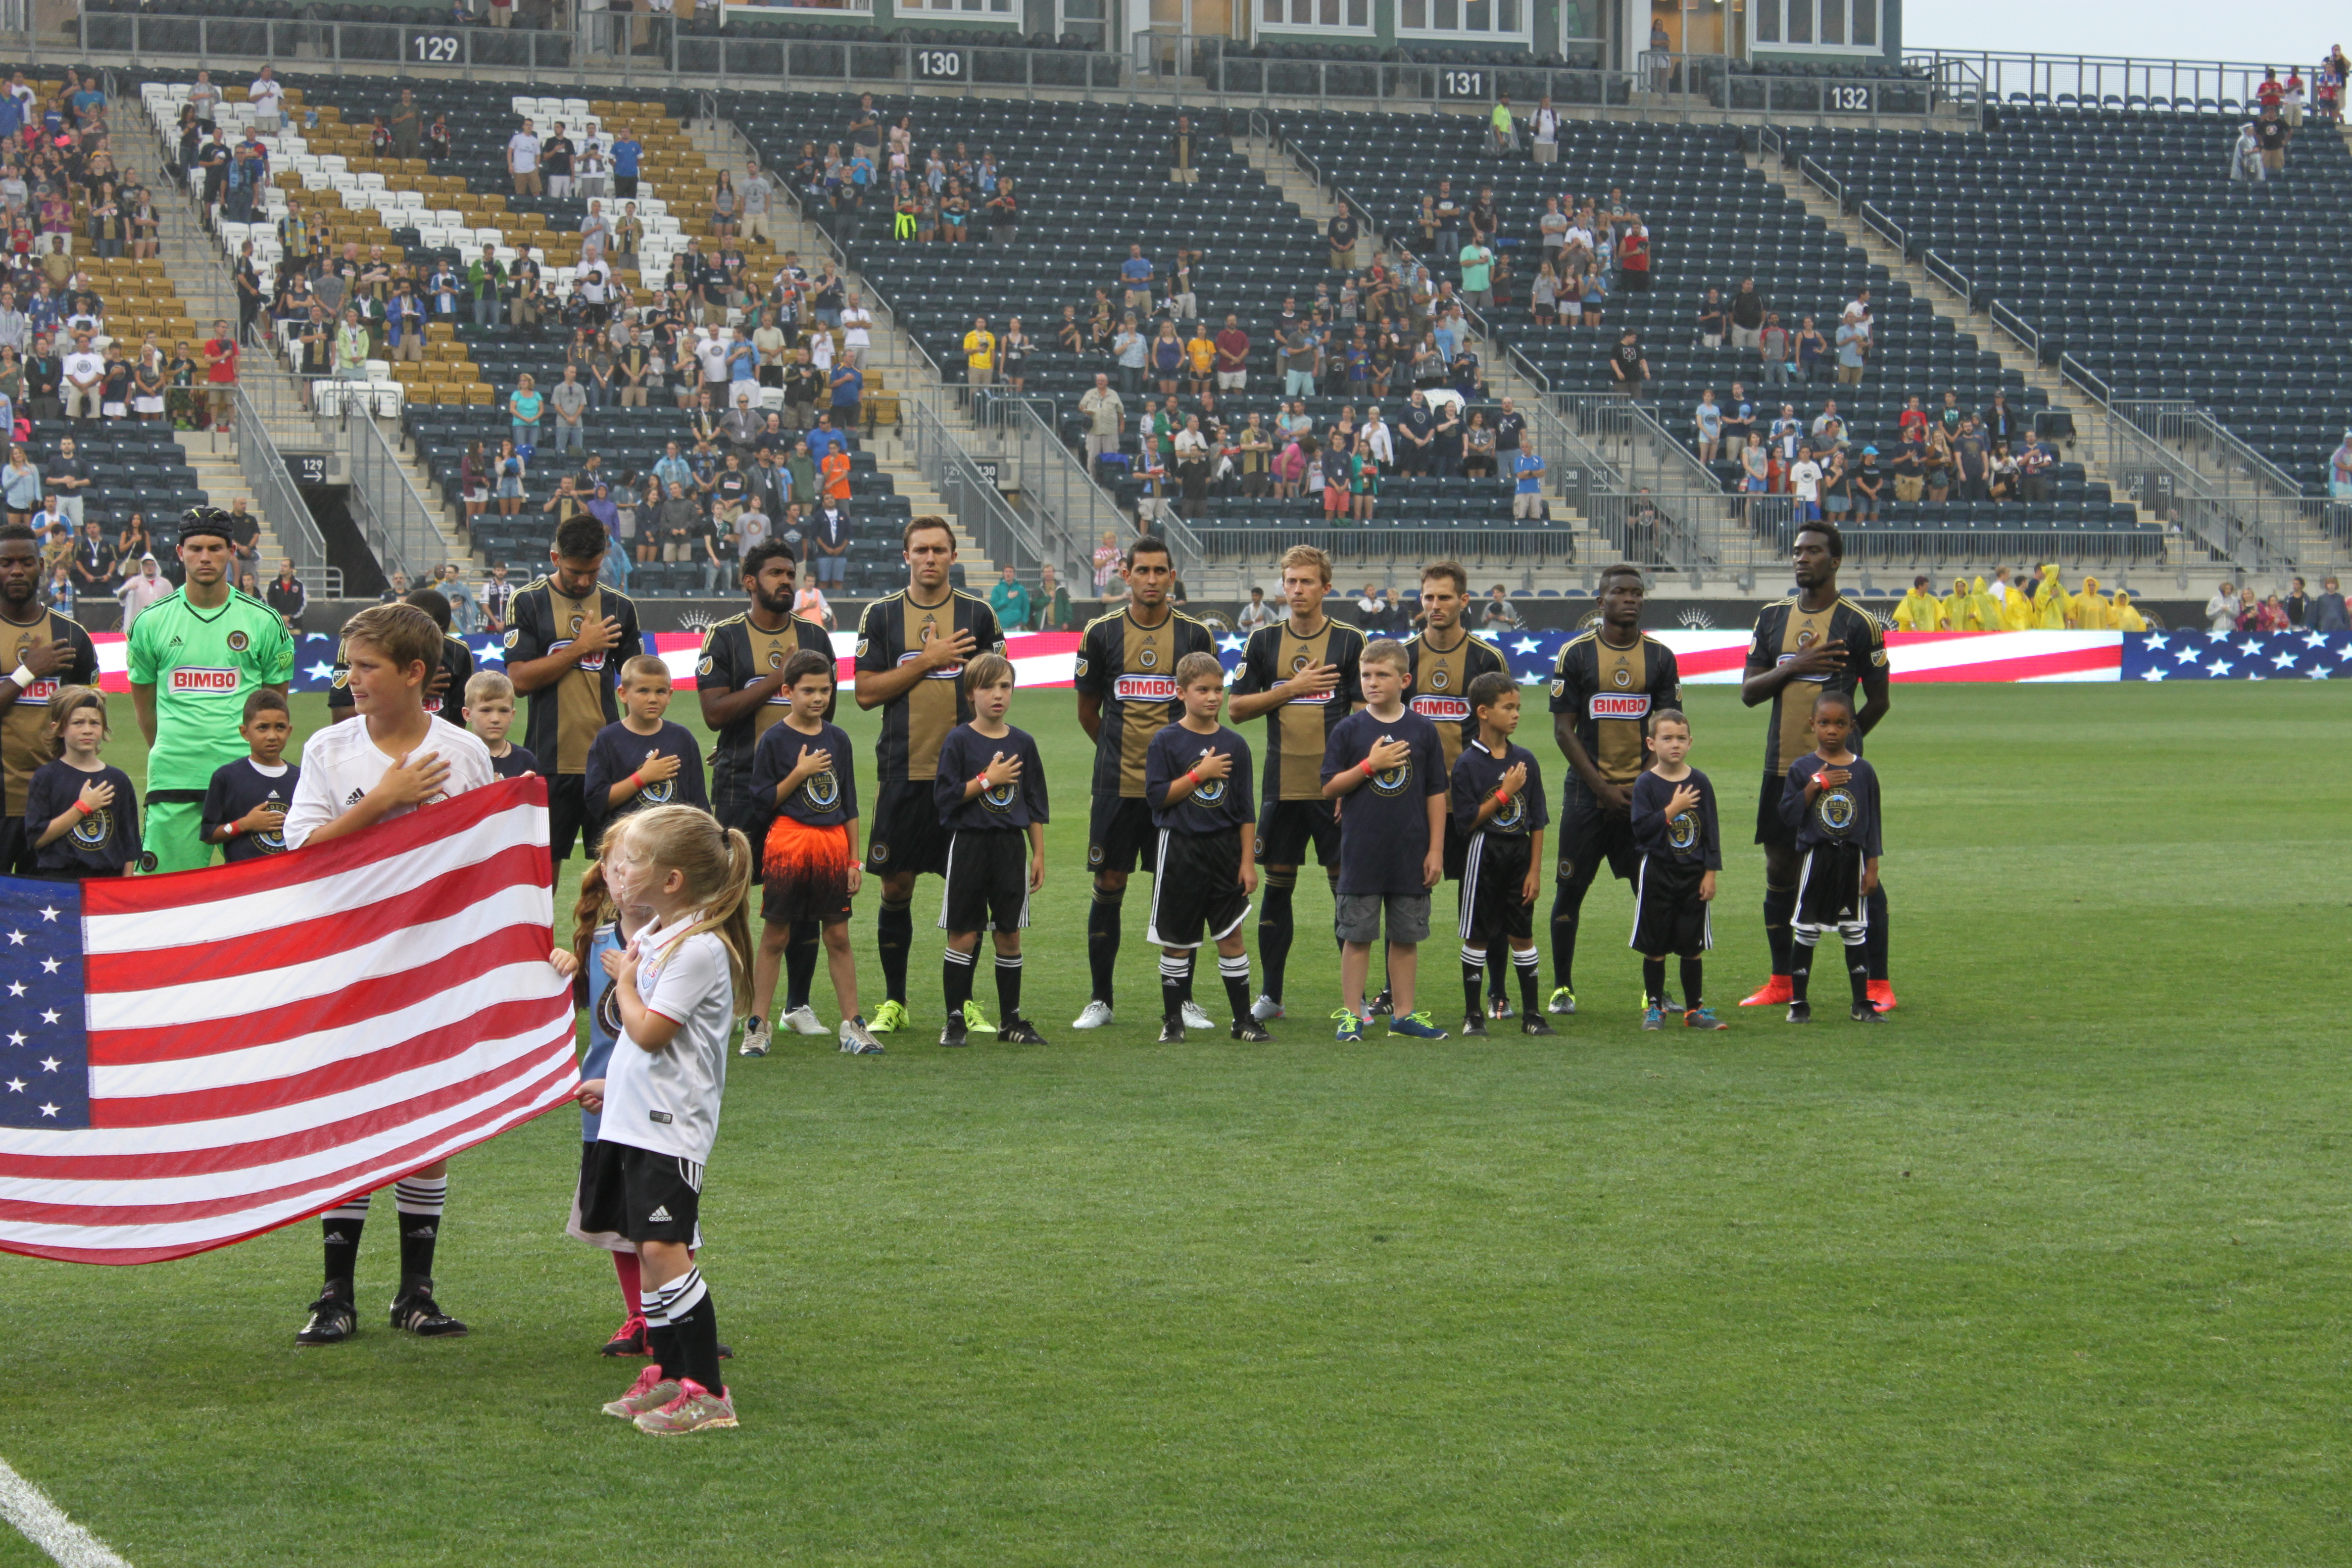 U9 Cecil Rebels as player escorts for the Philadelphia Union at the Lamar Hunt US Open Match.